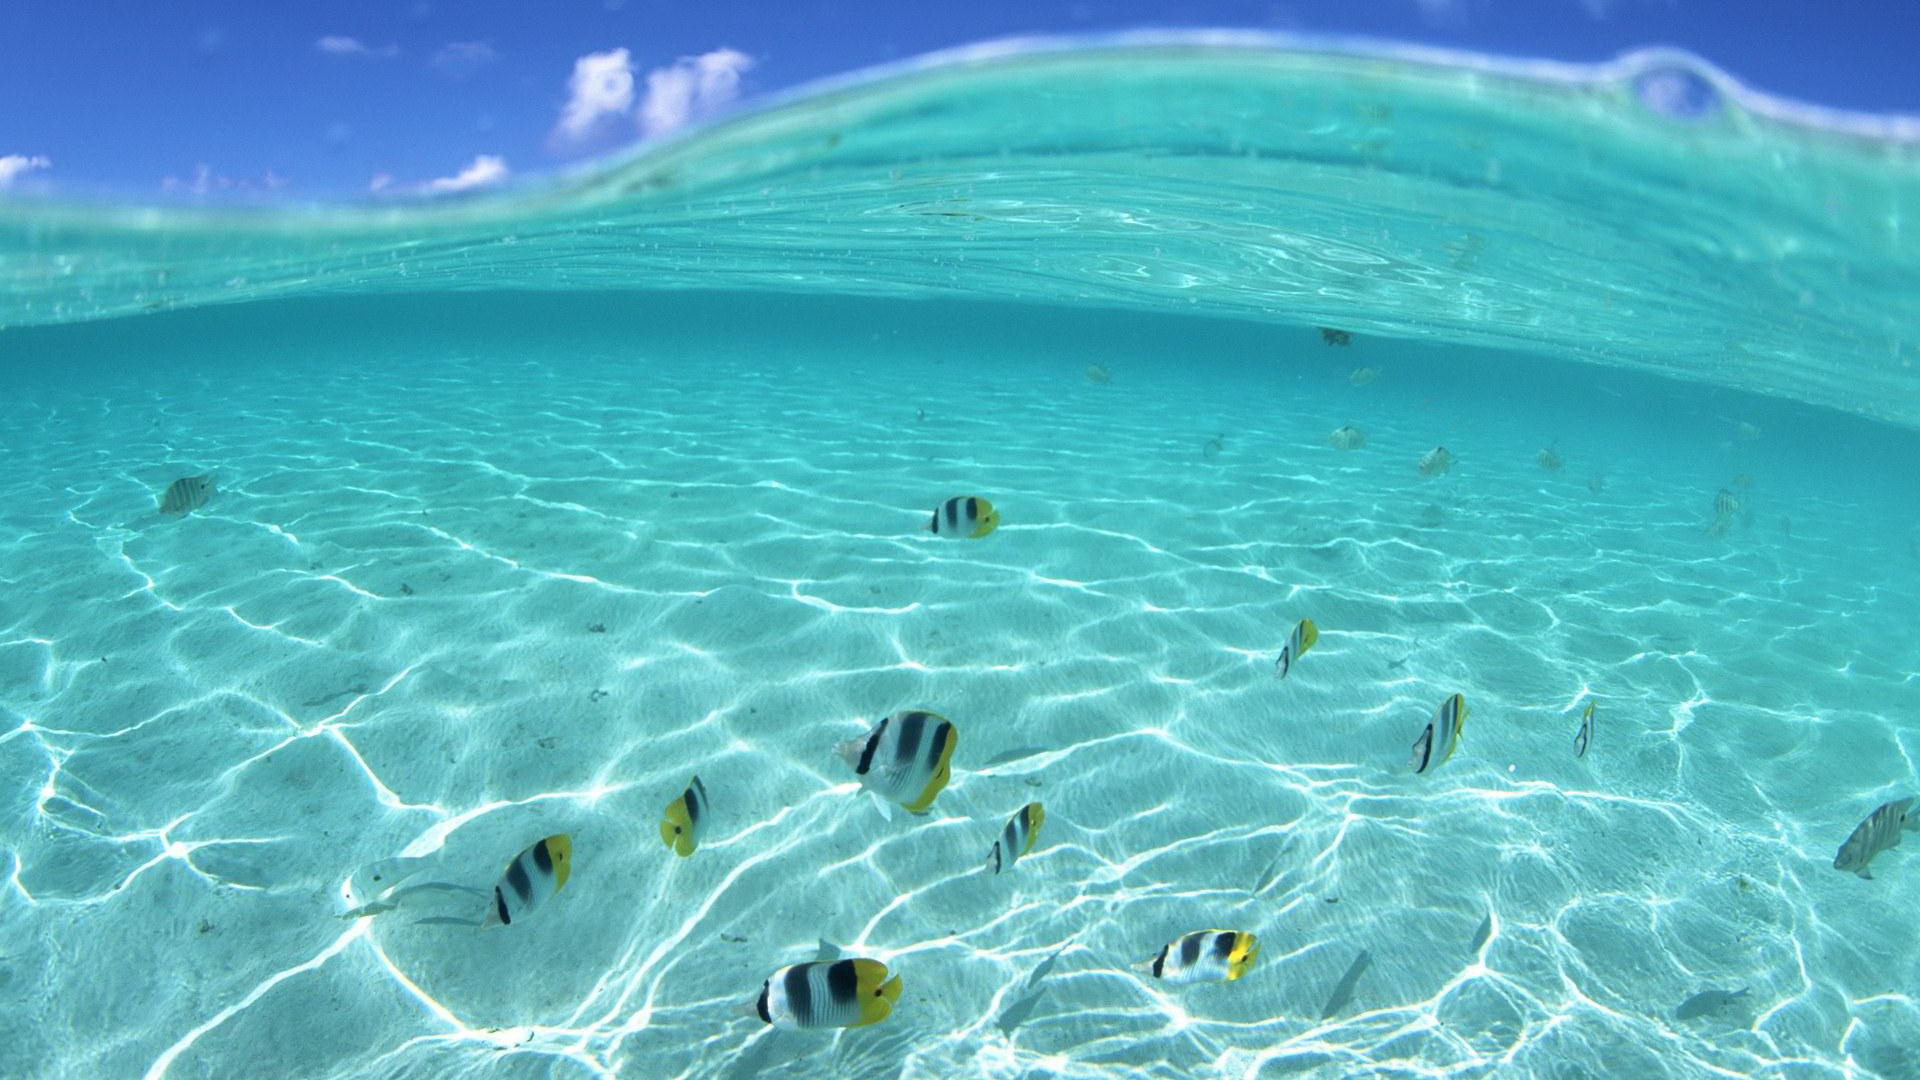 Pics of Clear Sea - The Sea is Incredibly Blue and Clear, You Know Where Sea Fishes Are Going--1920X1080 free wallpaper download